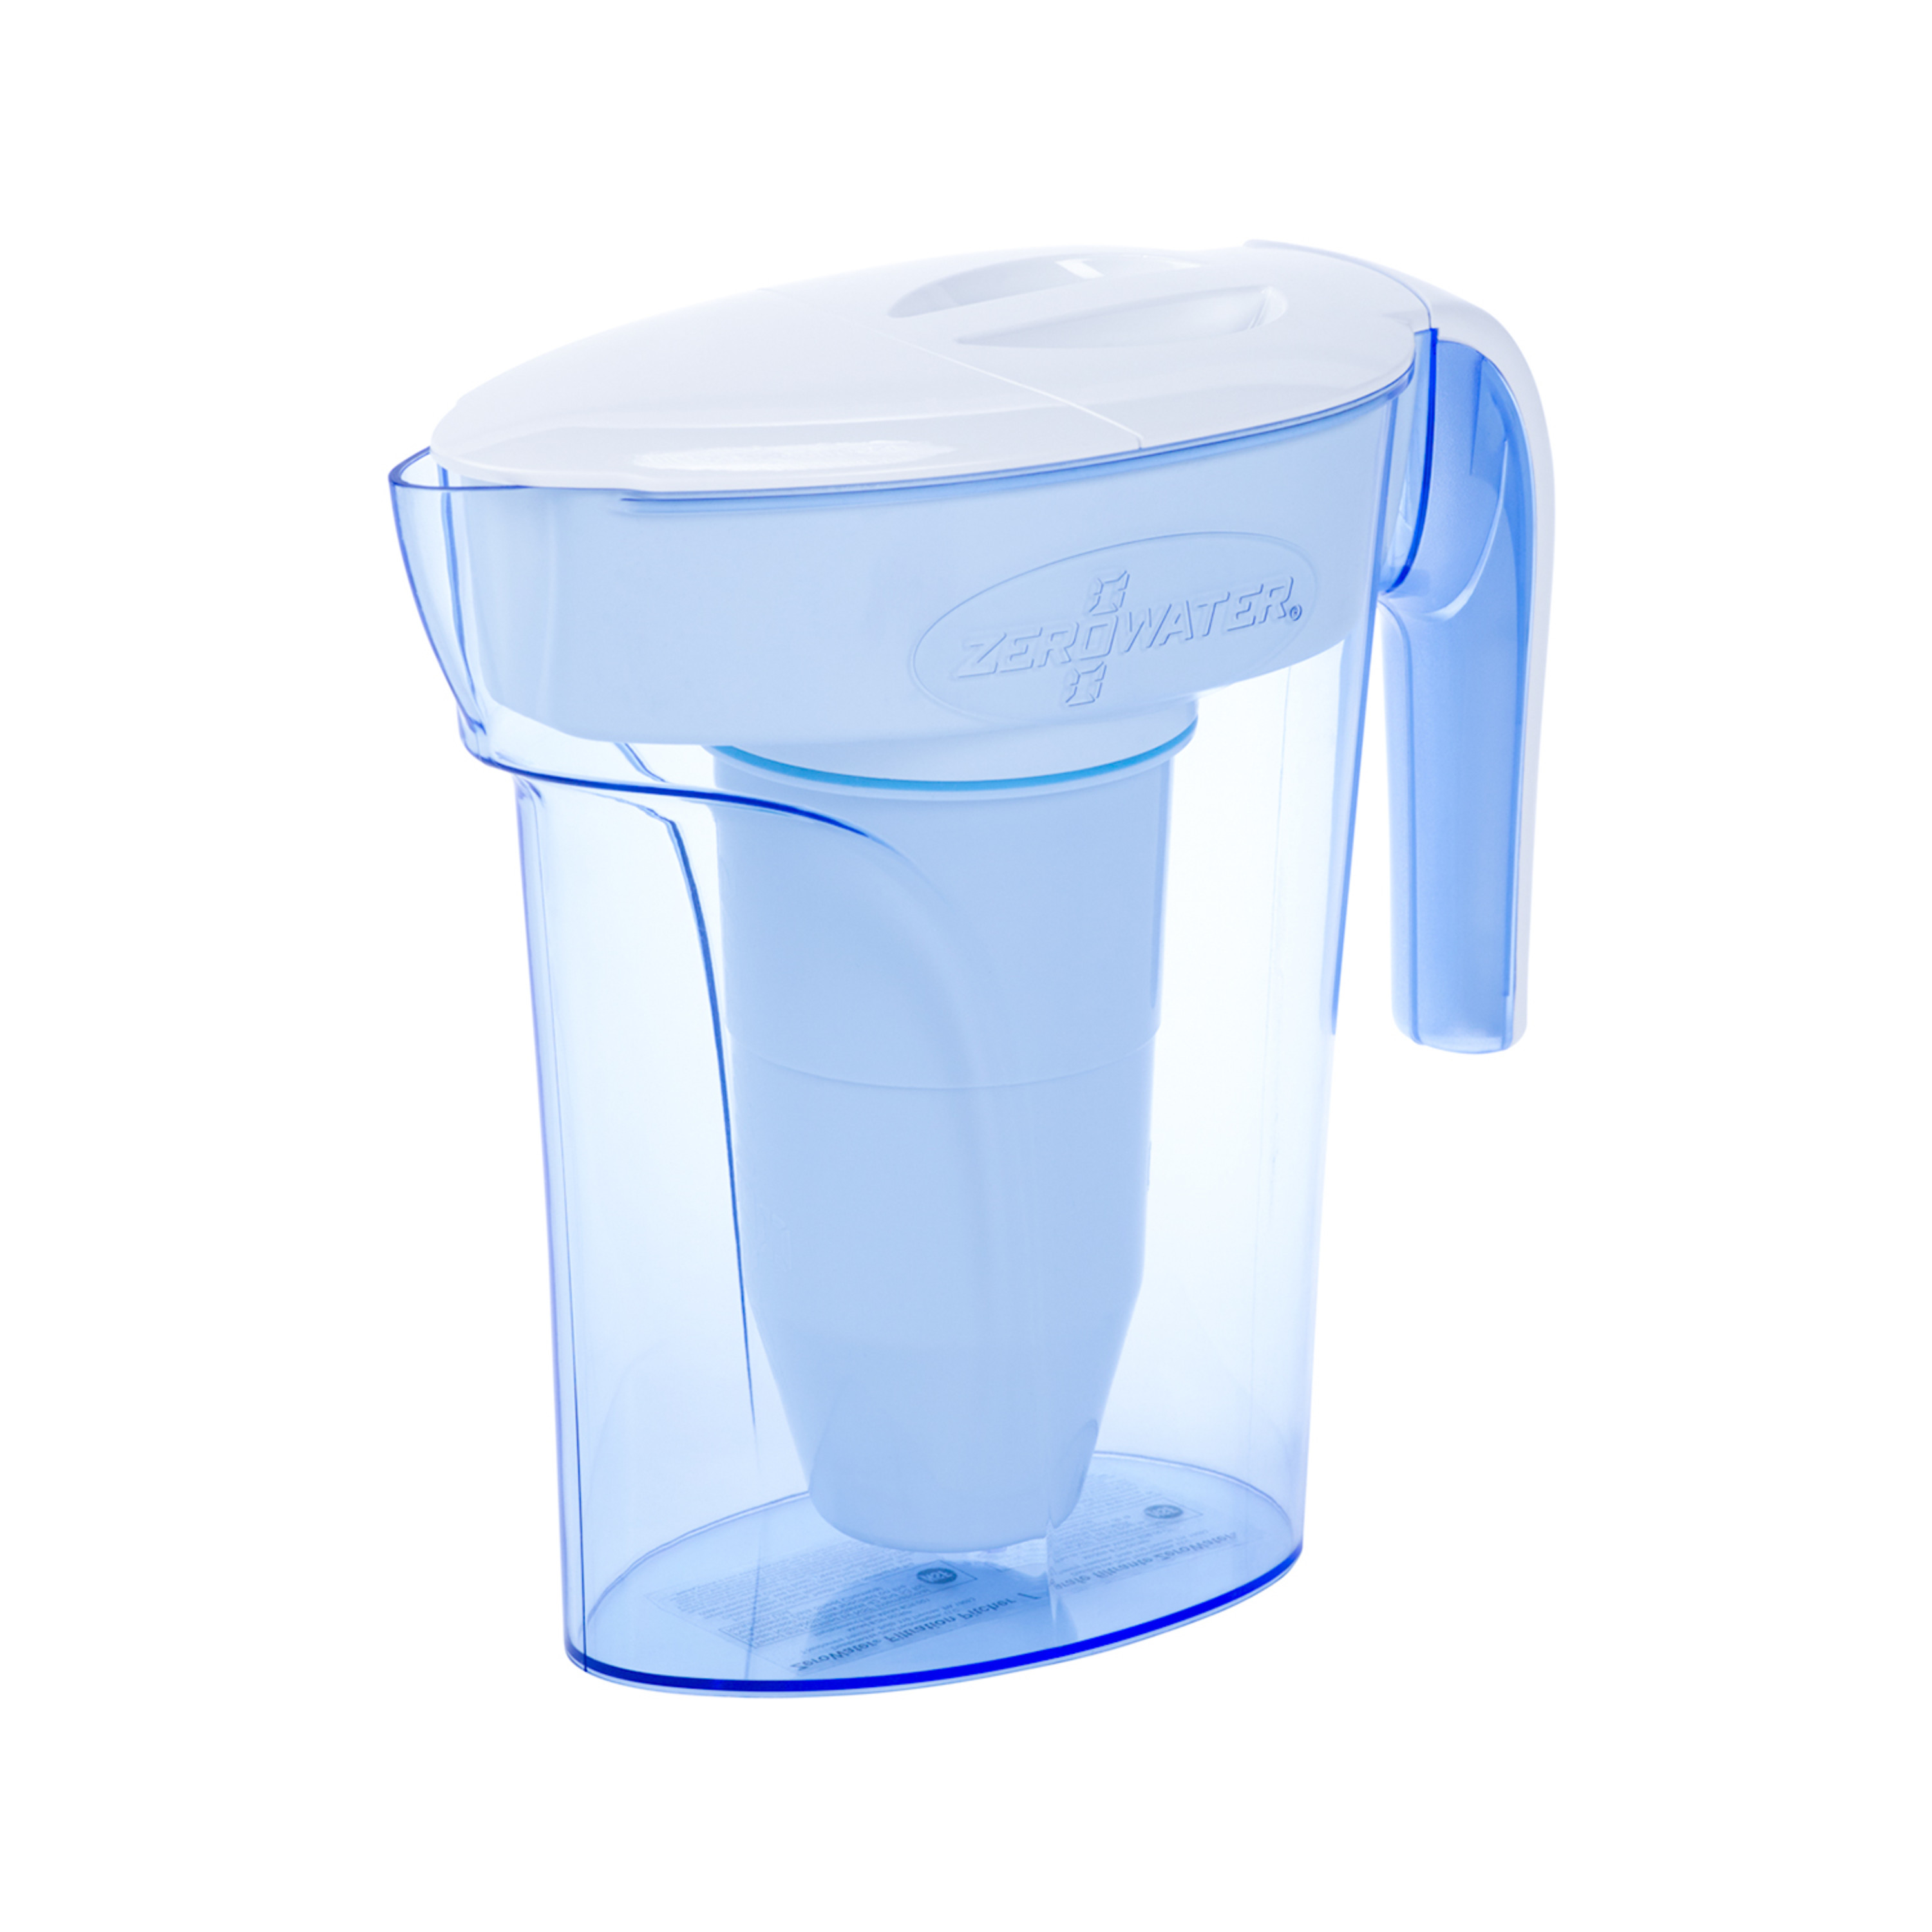 Zerowater 7 Cup 5-Stage Ready-Pour™ Pitcher - image 1 of 6